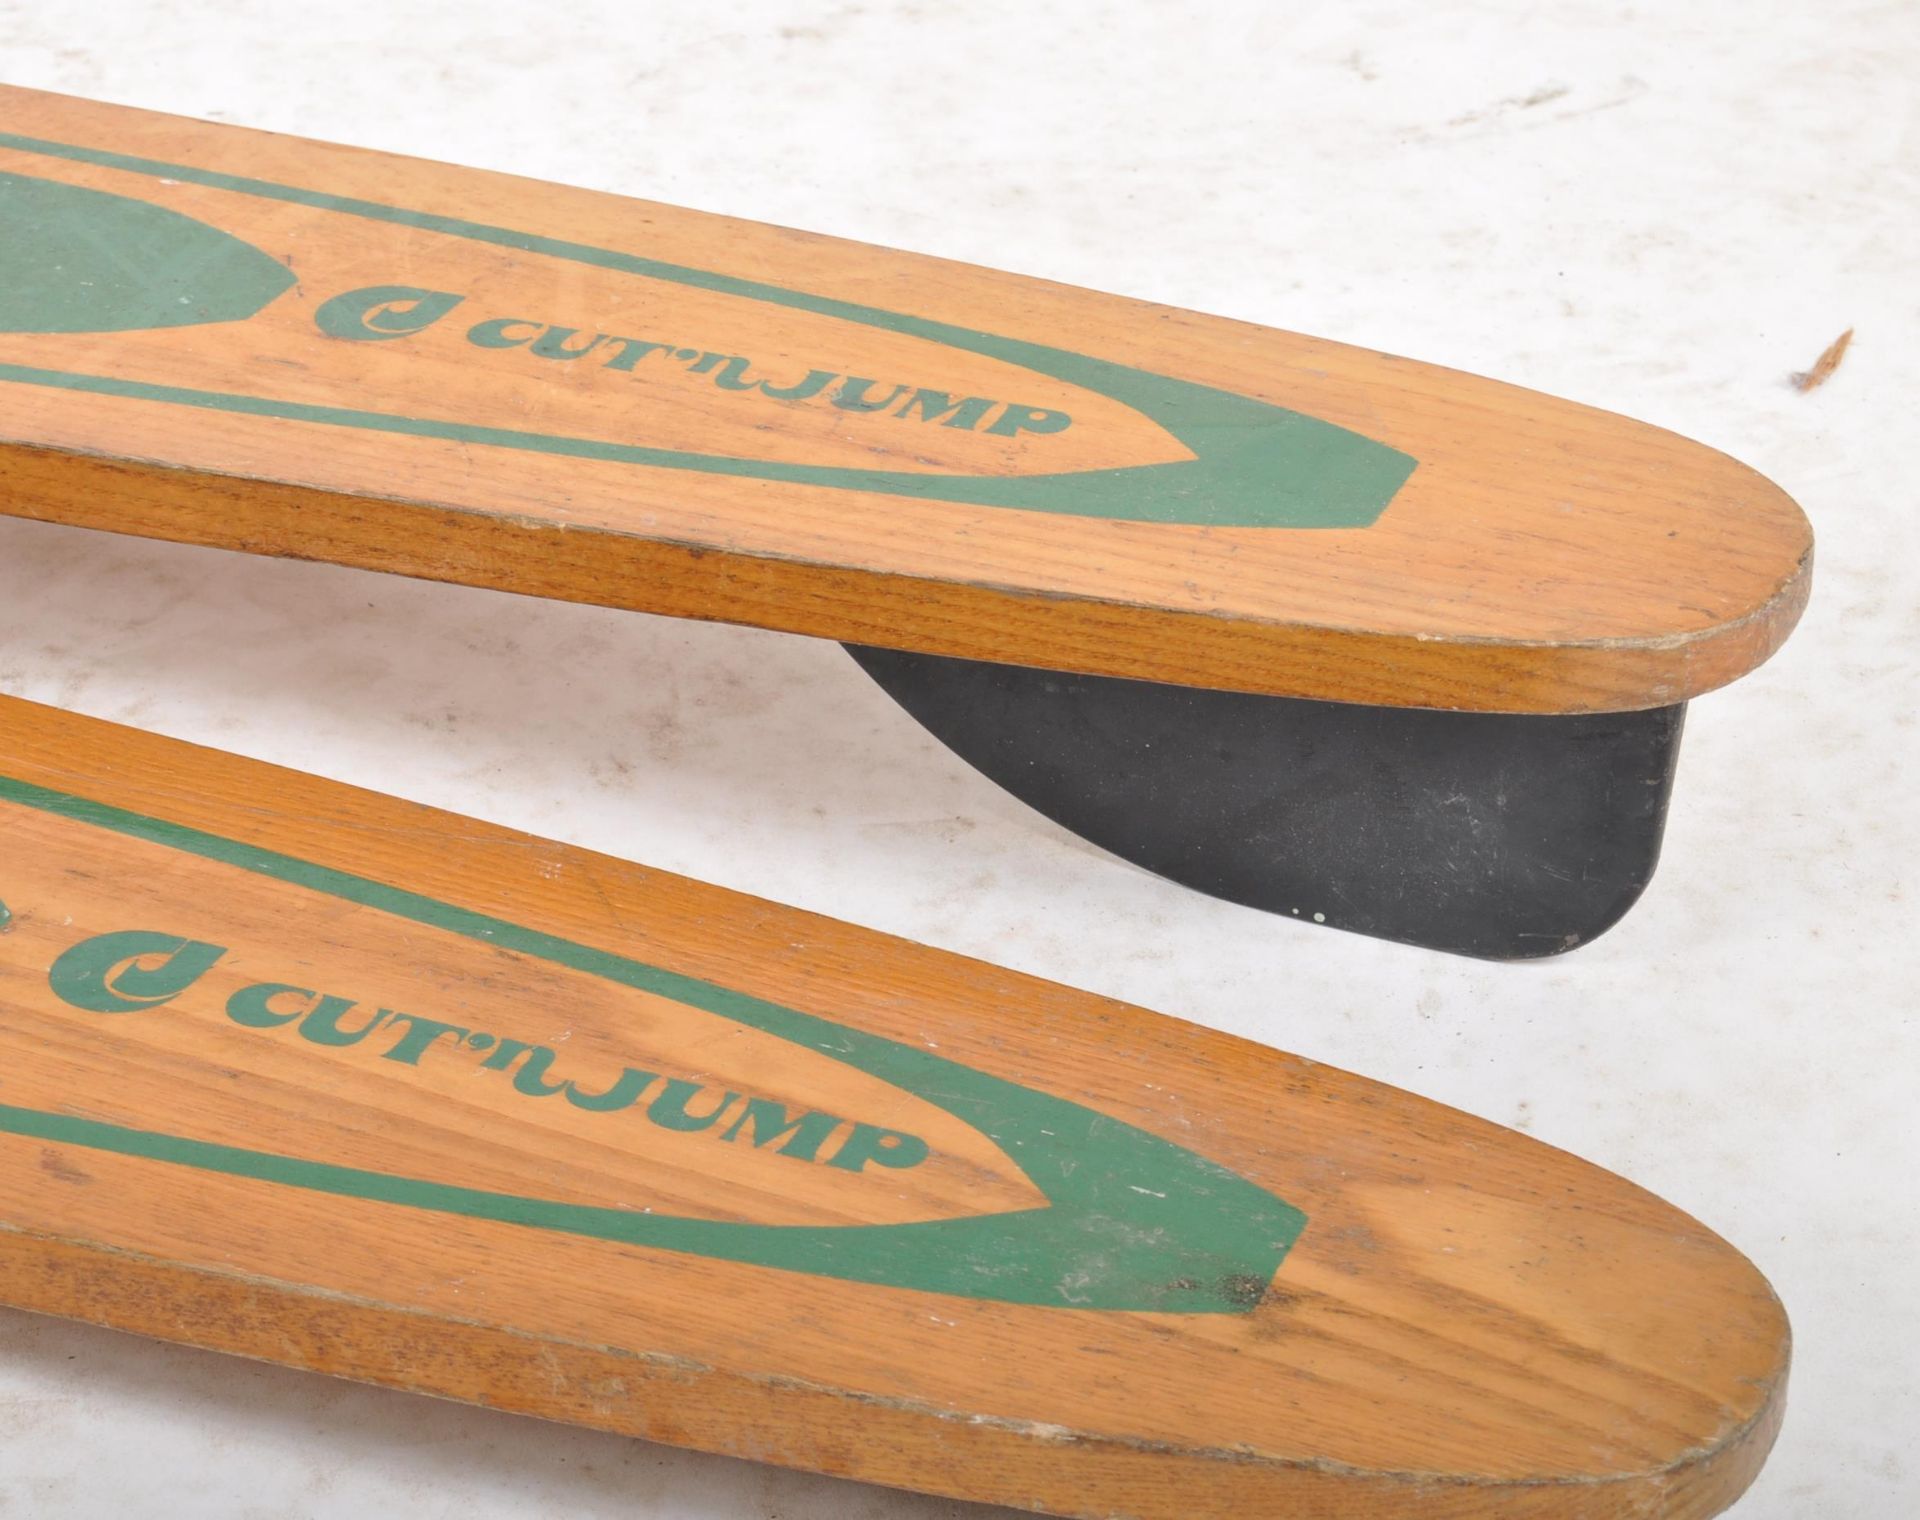 CUT'N JUMP - PAIR OF 70s COMBINATION WATER SKIS - Image 4 of 5